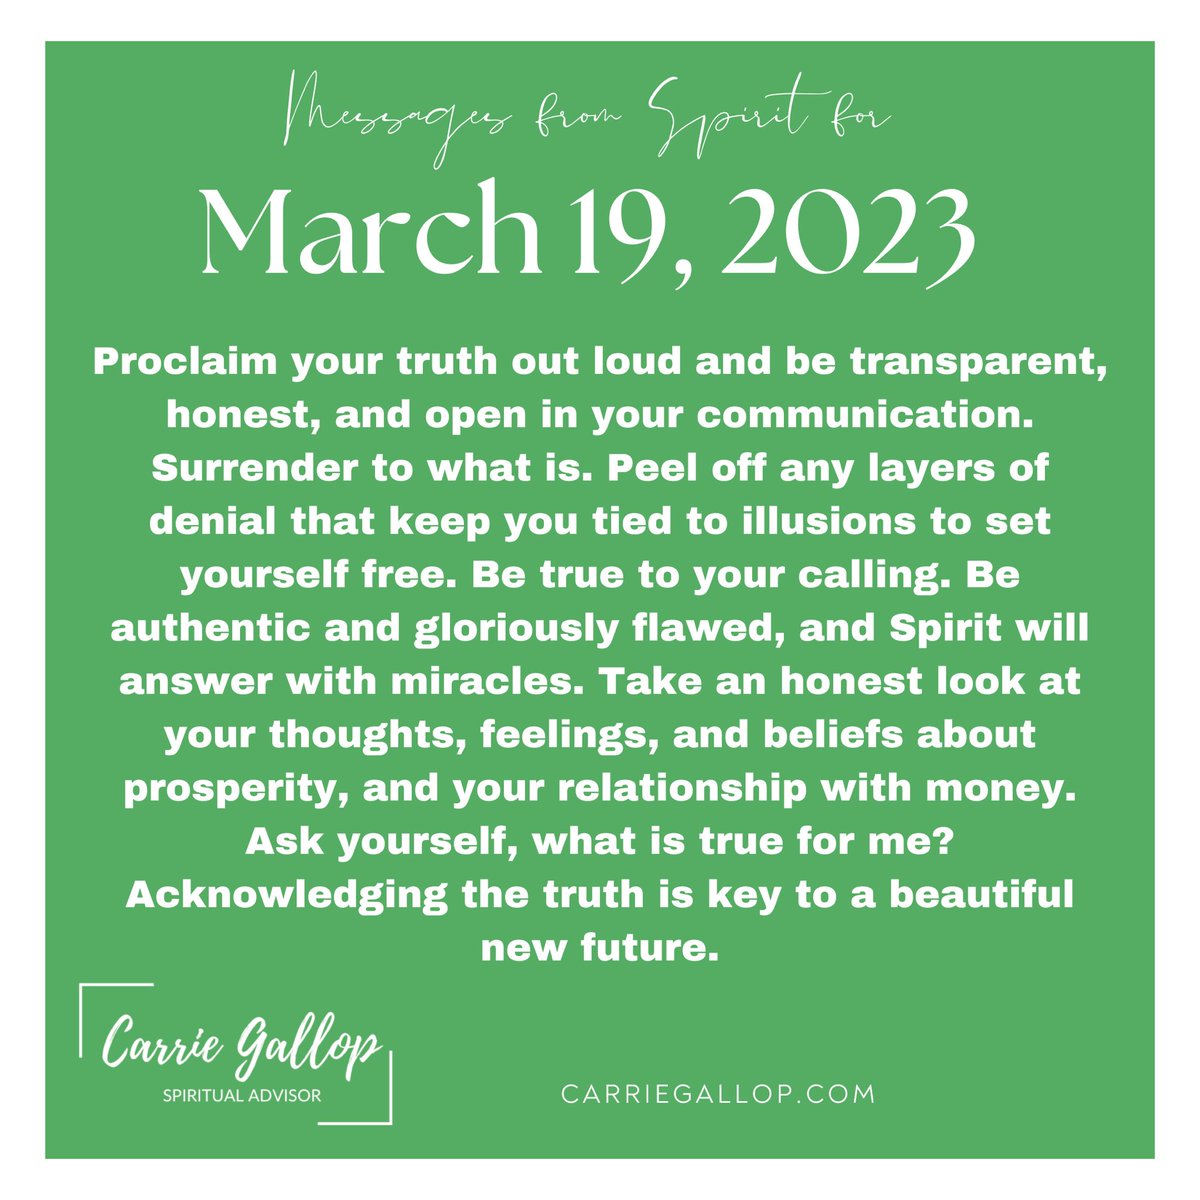 Messages From Spirit for March 19, 2023 ✨

#Daily #Guidance #Message #MessagesFromSpirit #March19 #Mar19 #Proclaim #Truth #BeTransparent #Honest #Open #Communication #Surrender #Peel #Layers #Illusions #SetYourselfFree #BeTrue #Calling #Authentic #Flawed #Spirit #Miracles #Look